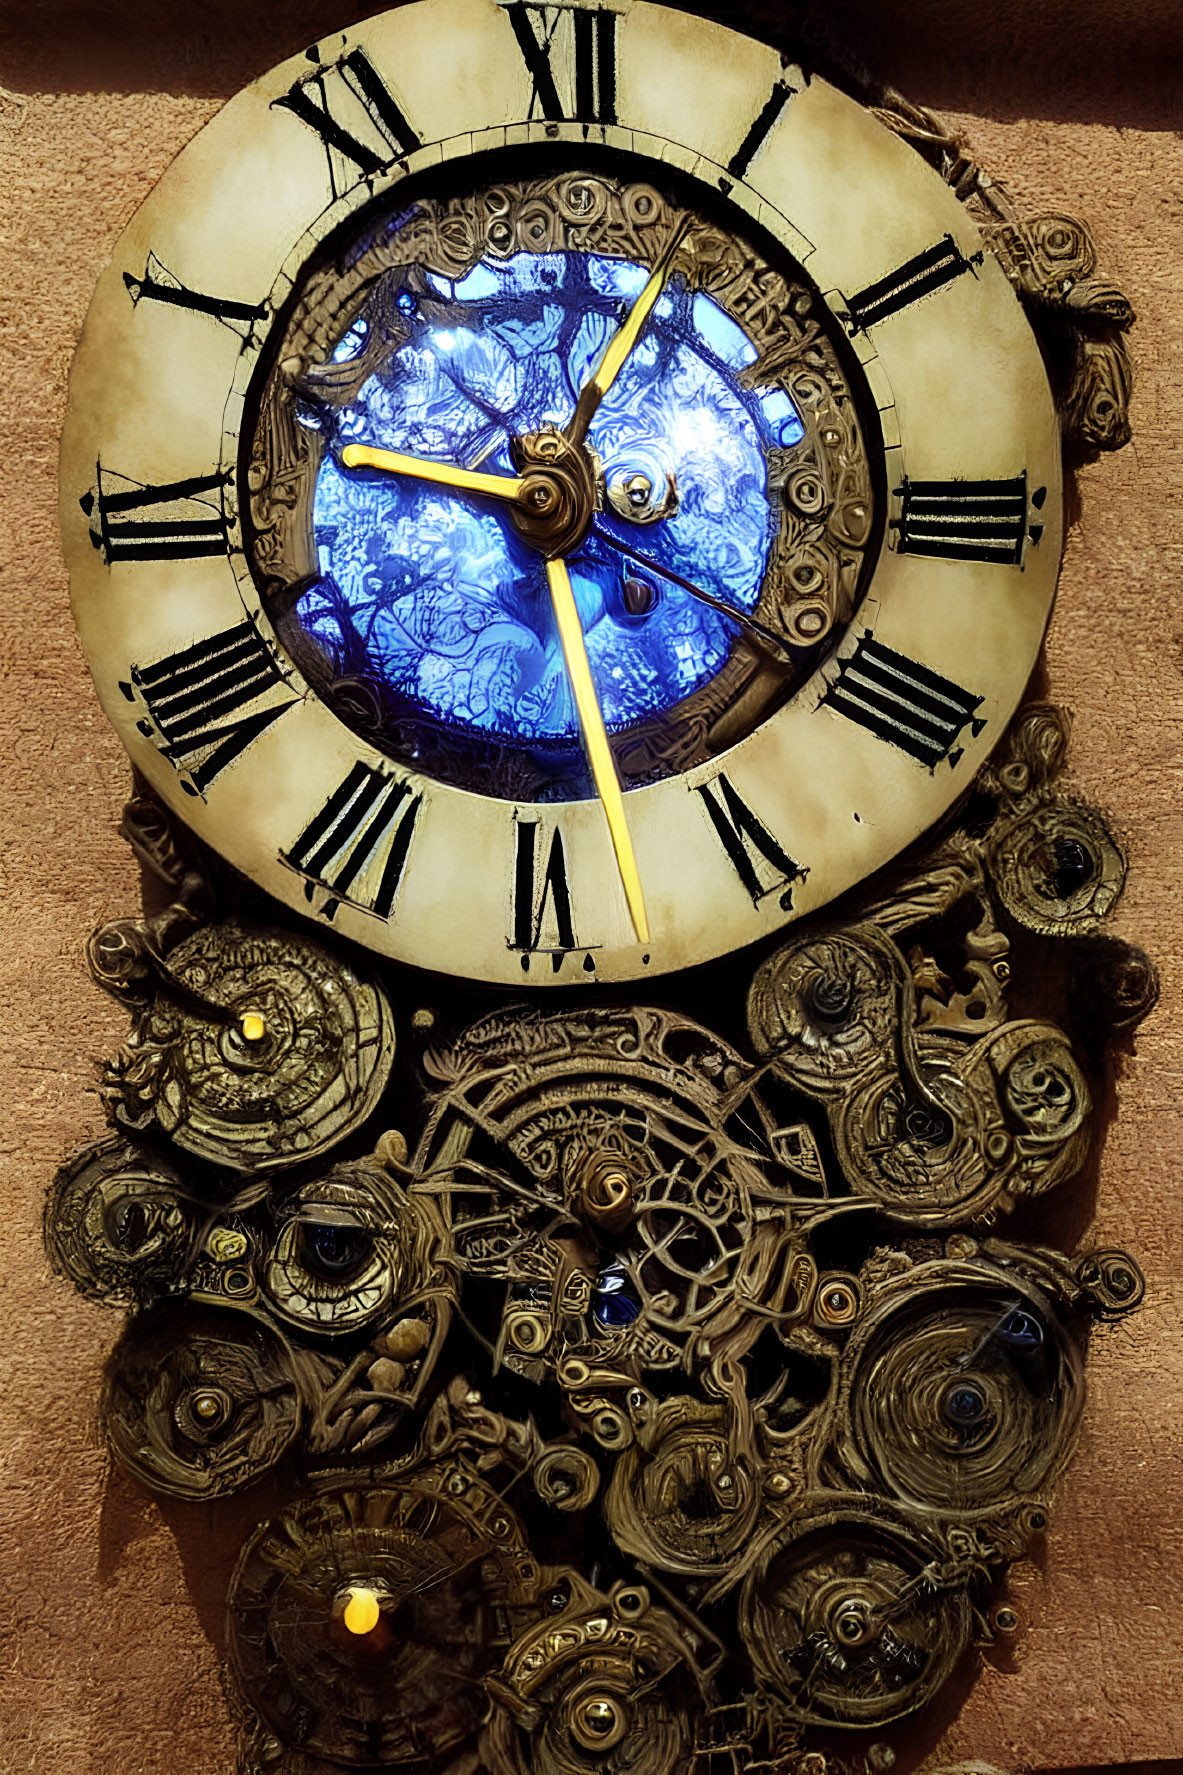 Steampunk-style clock face with Roman numerals, gears, blue and gold colors